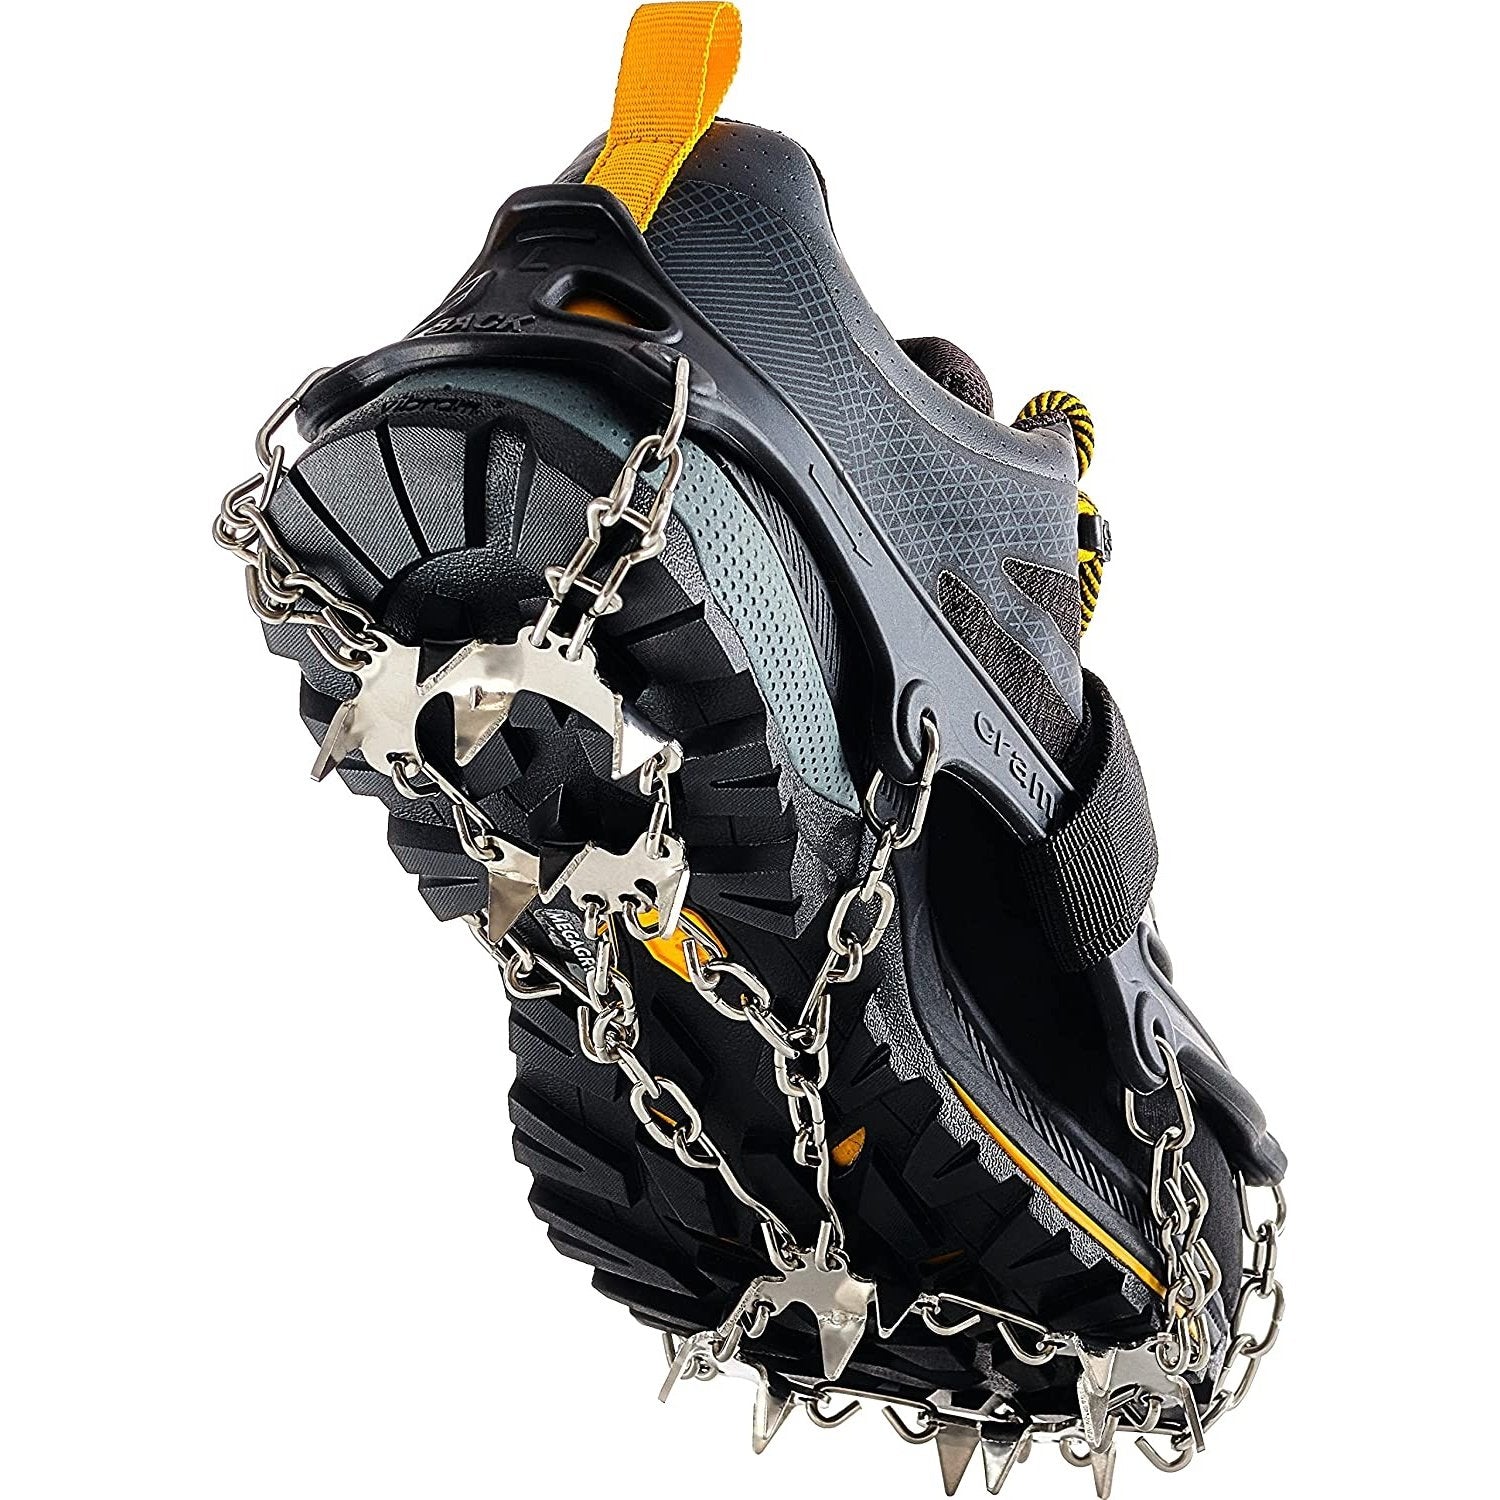 Crampons Ice Cleats for Hiking Boots and Shoes, Anti Slip Walk Tractio